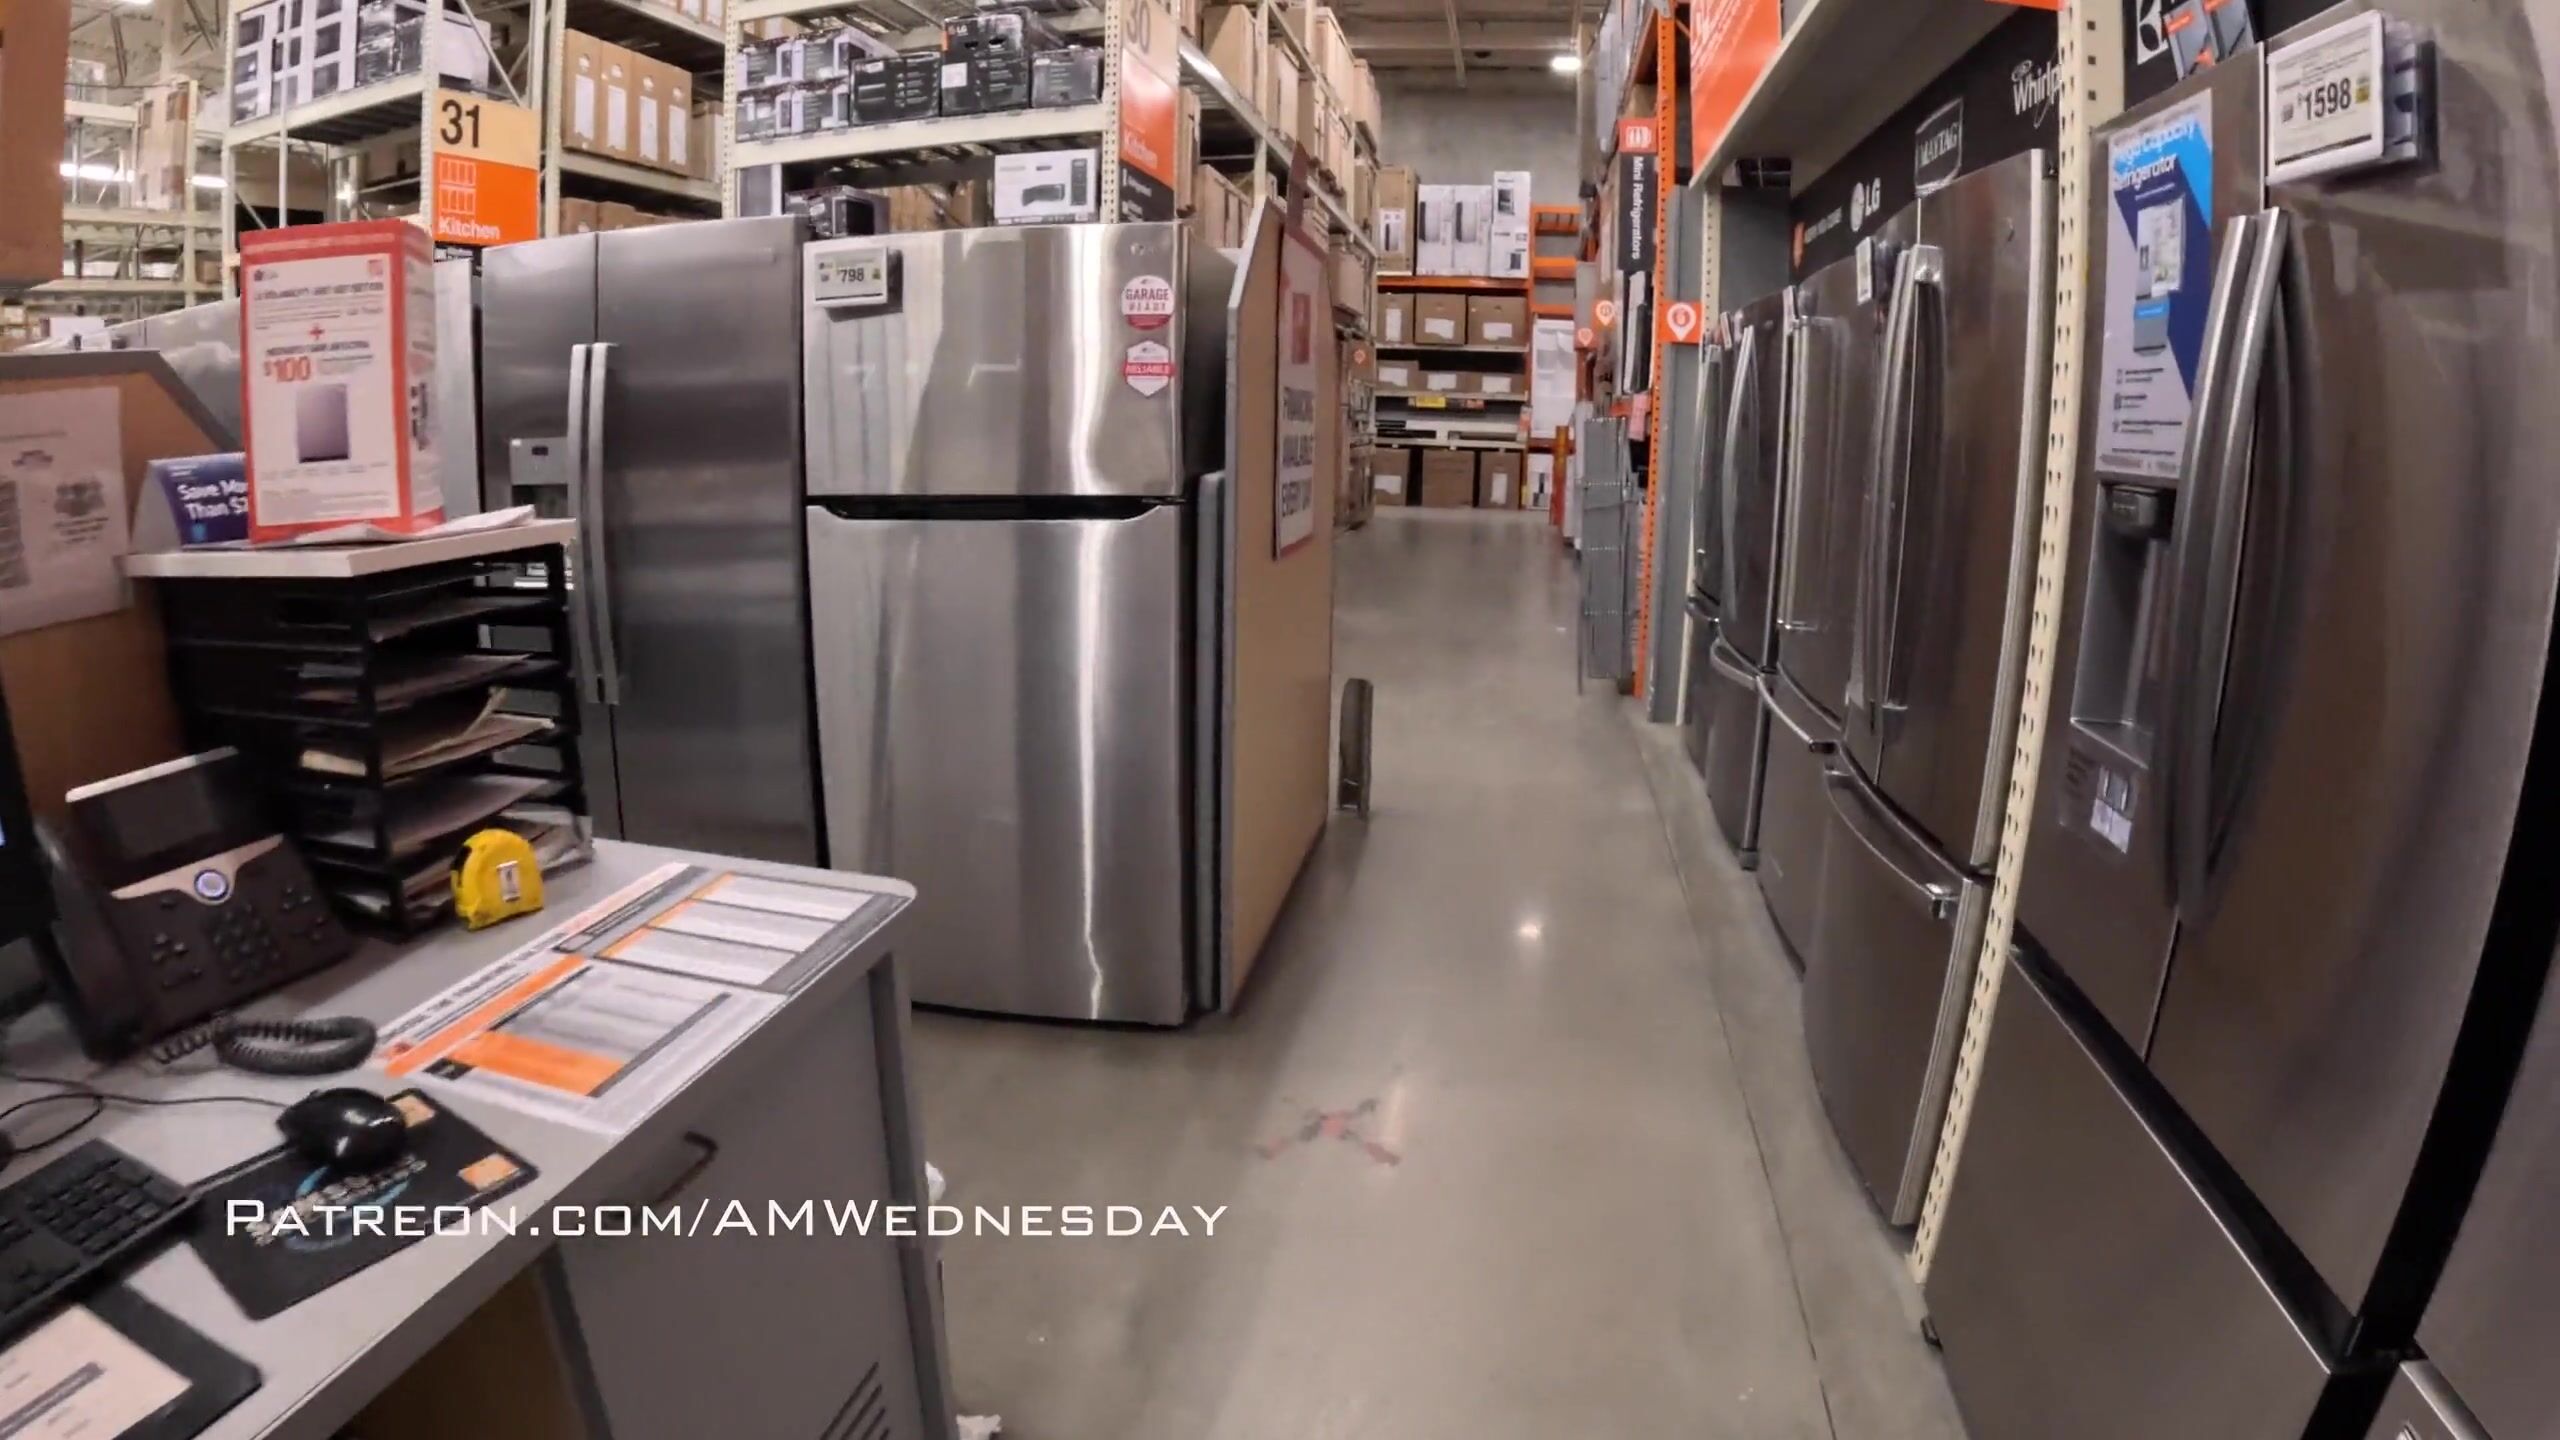 AMwednesday completely naked in hardware store